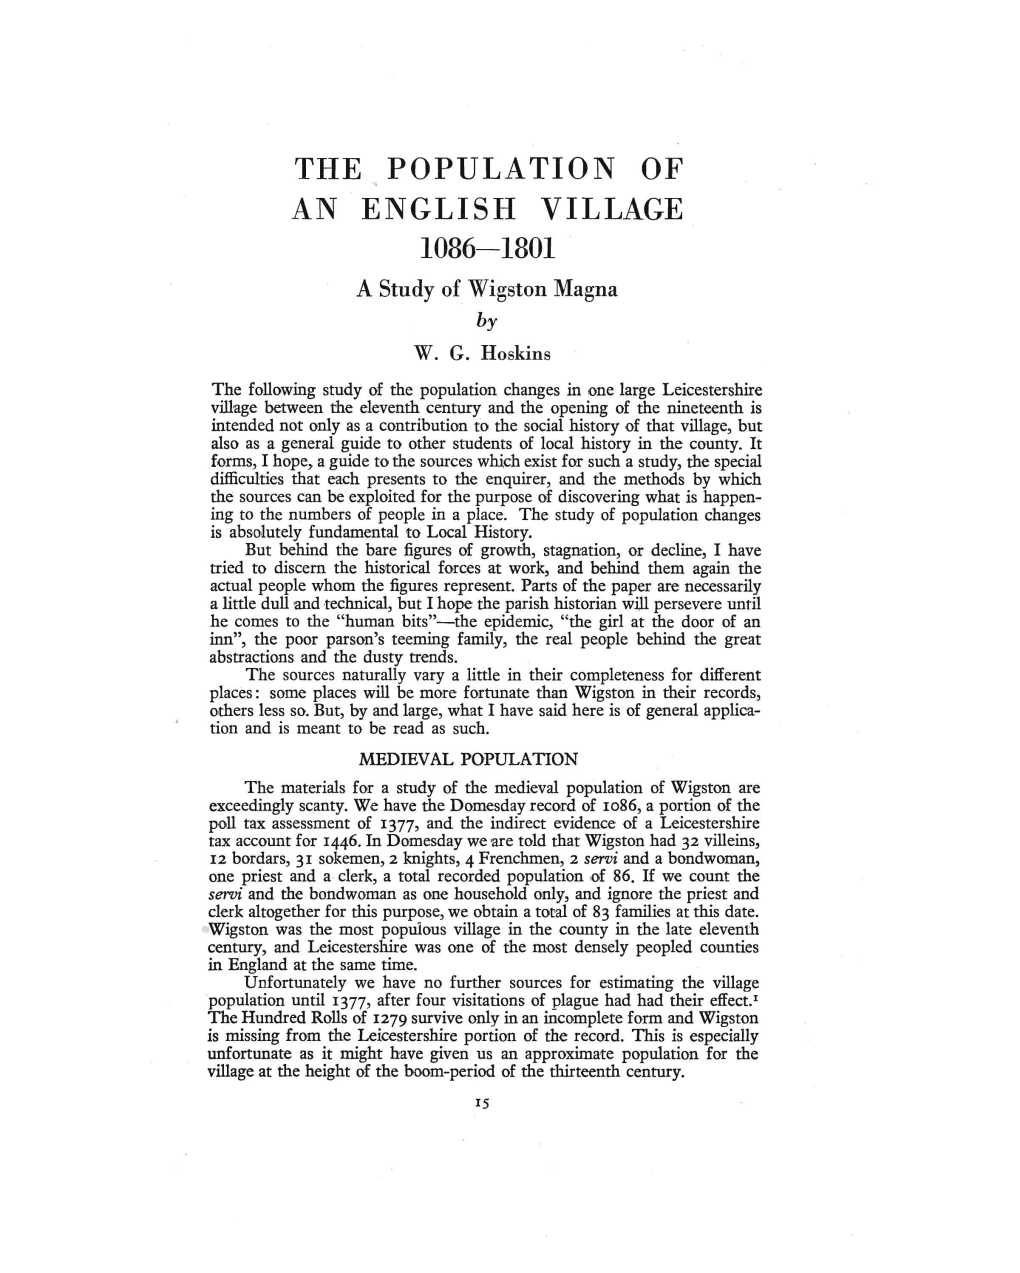 THE POPULATION of an ENGLISH VILLAGE 1086-1801 a Study of Wigston Magna by W